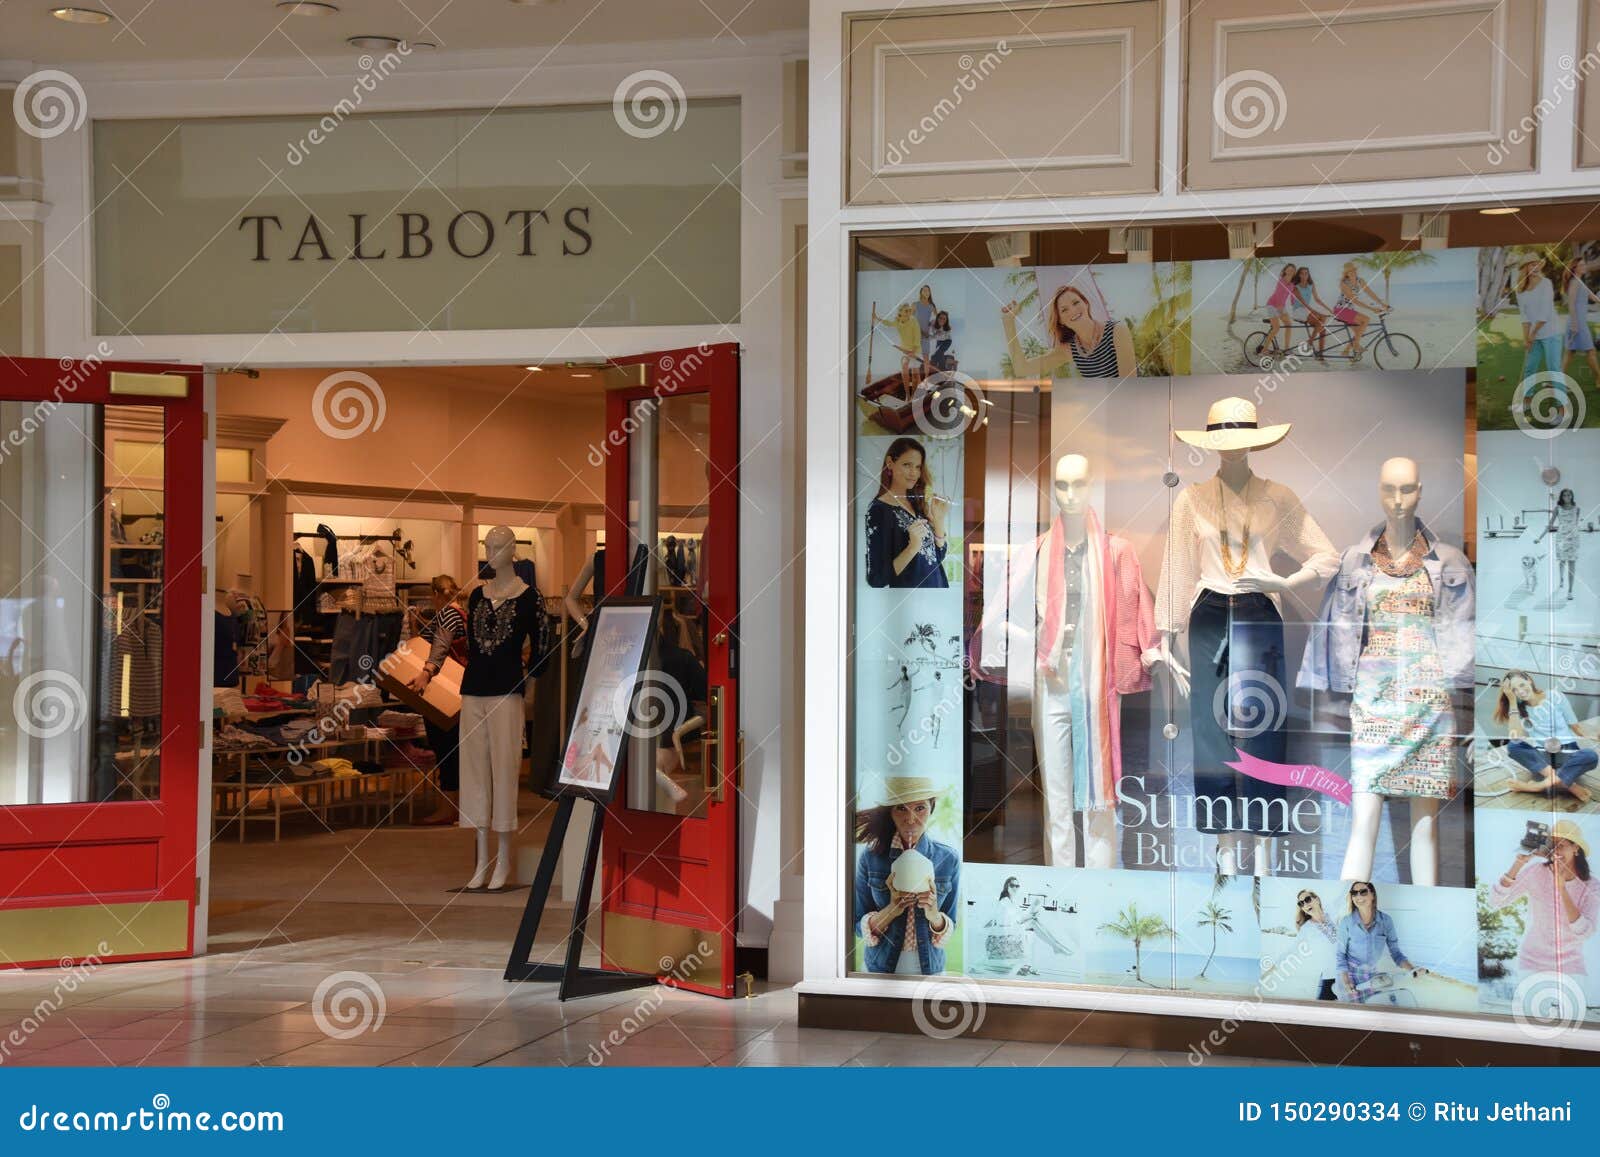 Talbots Store at the Galleria Mall in Houston, Texas Editorial